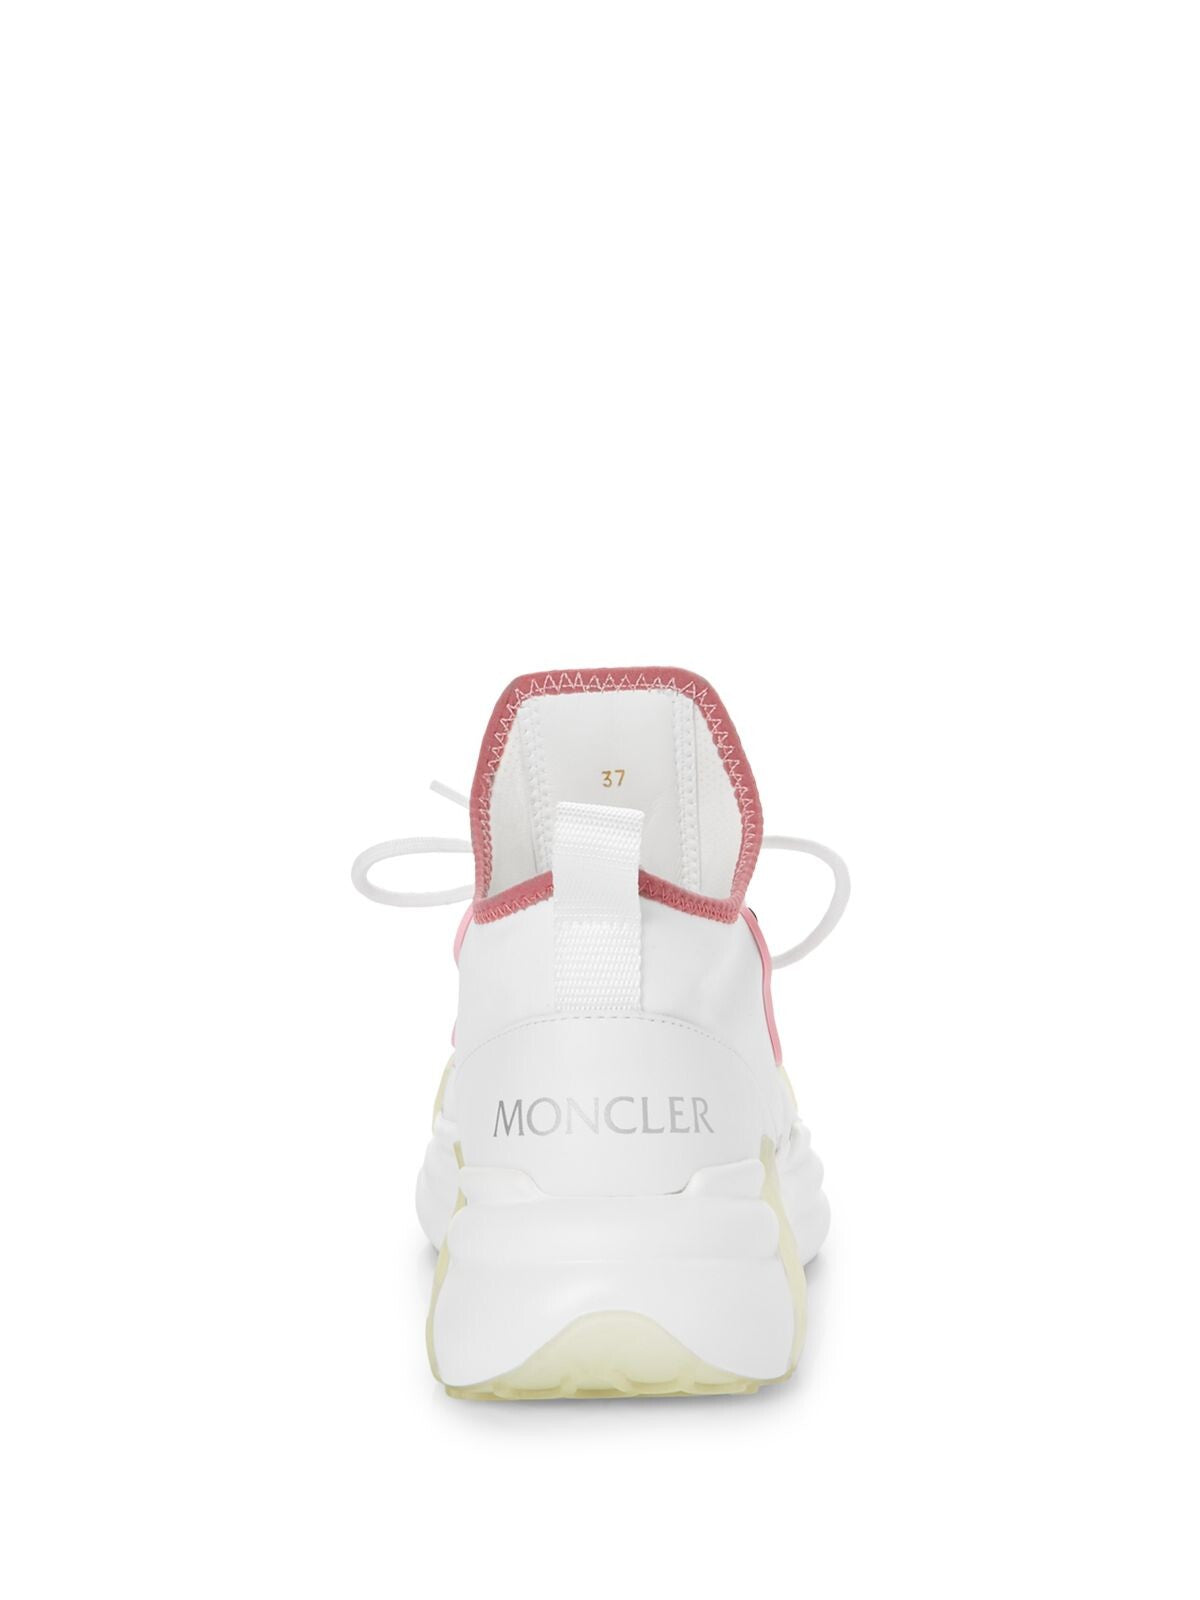 MONCLER Womens White Logo Pull Tab Removable Insole Stretch Lunarove Round Toe Lace-Up Athletic Sneakers 40